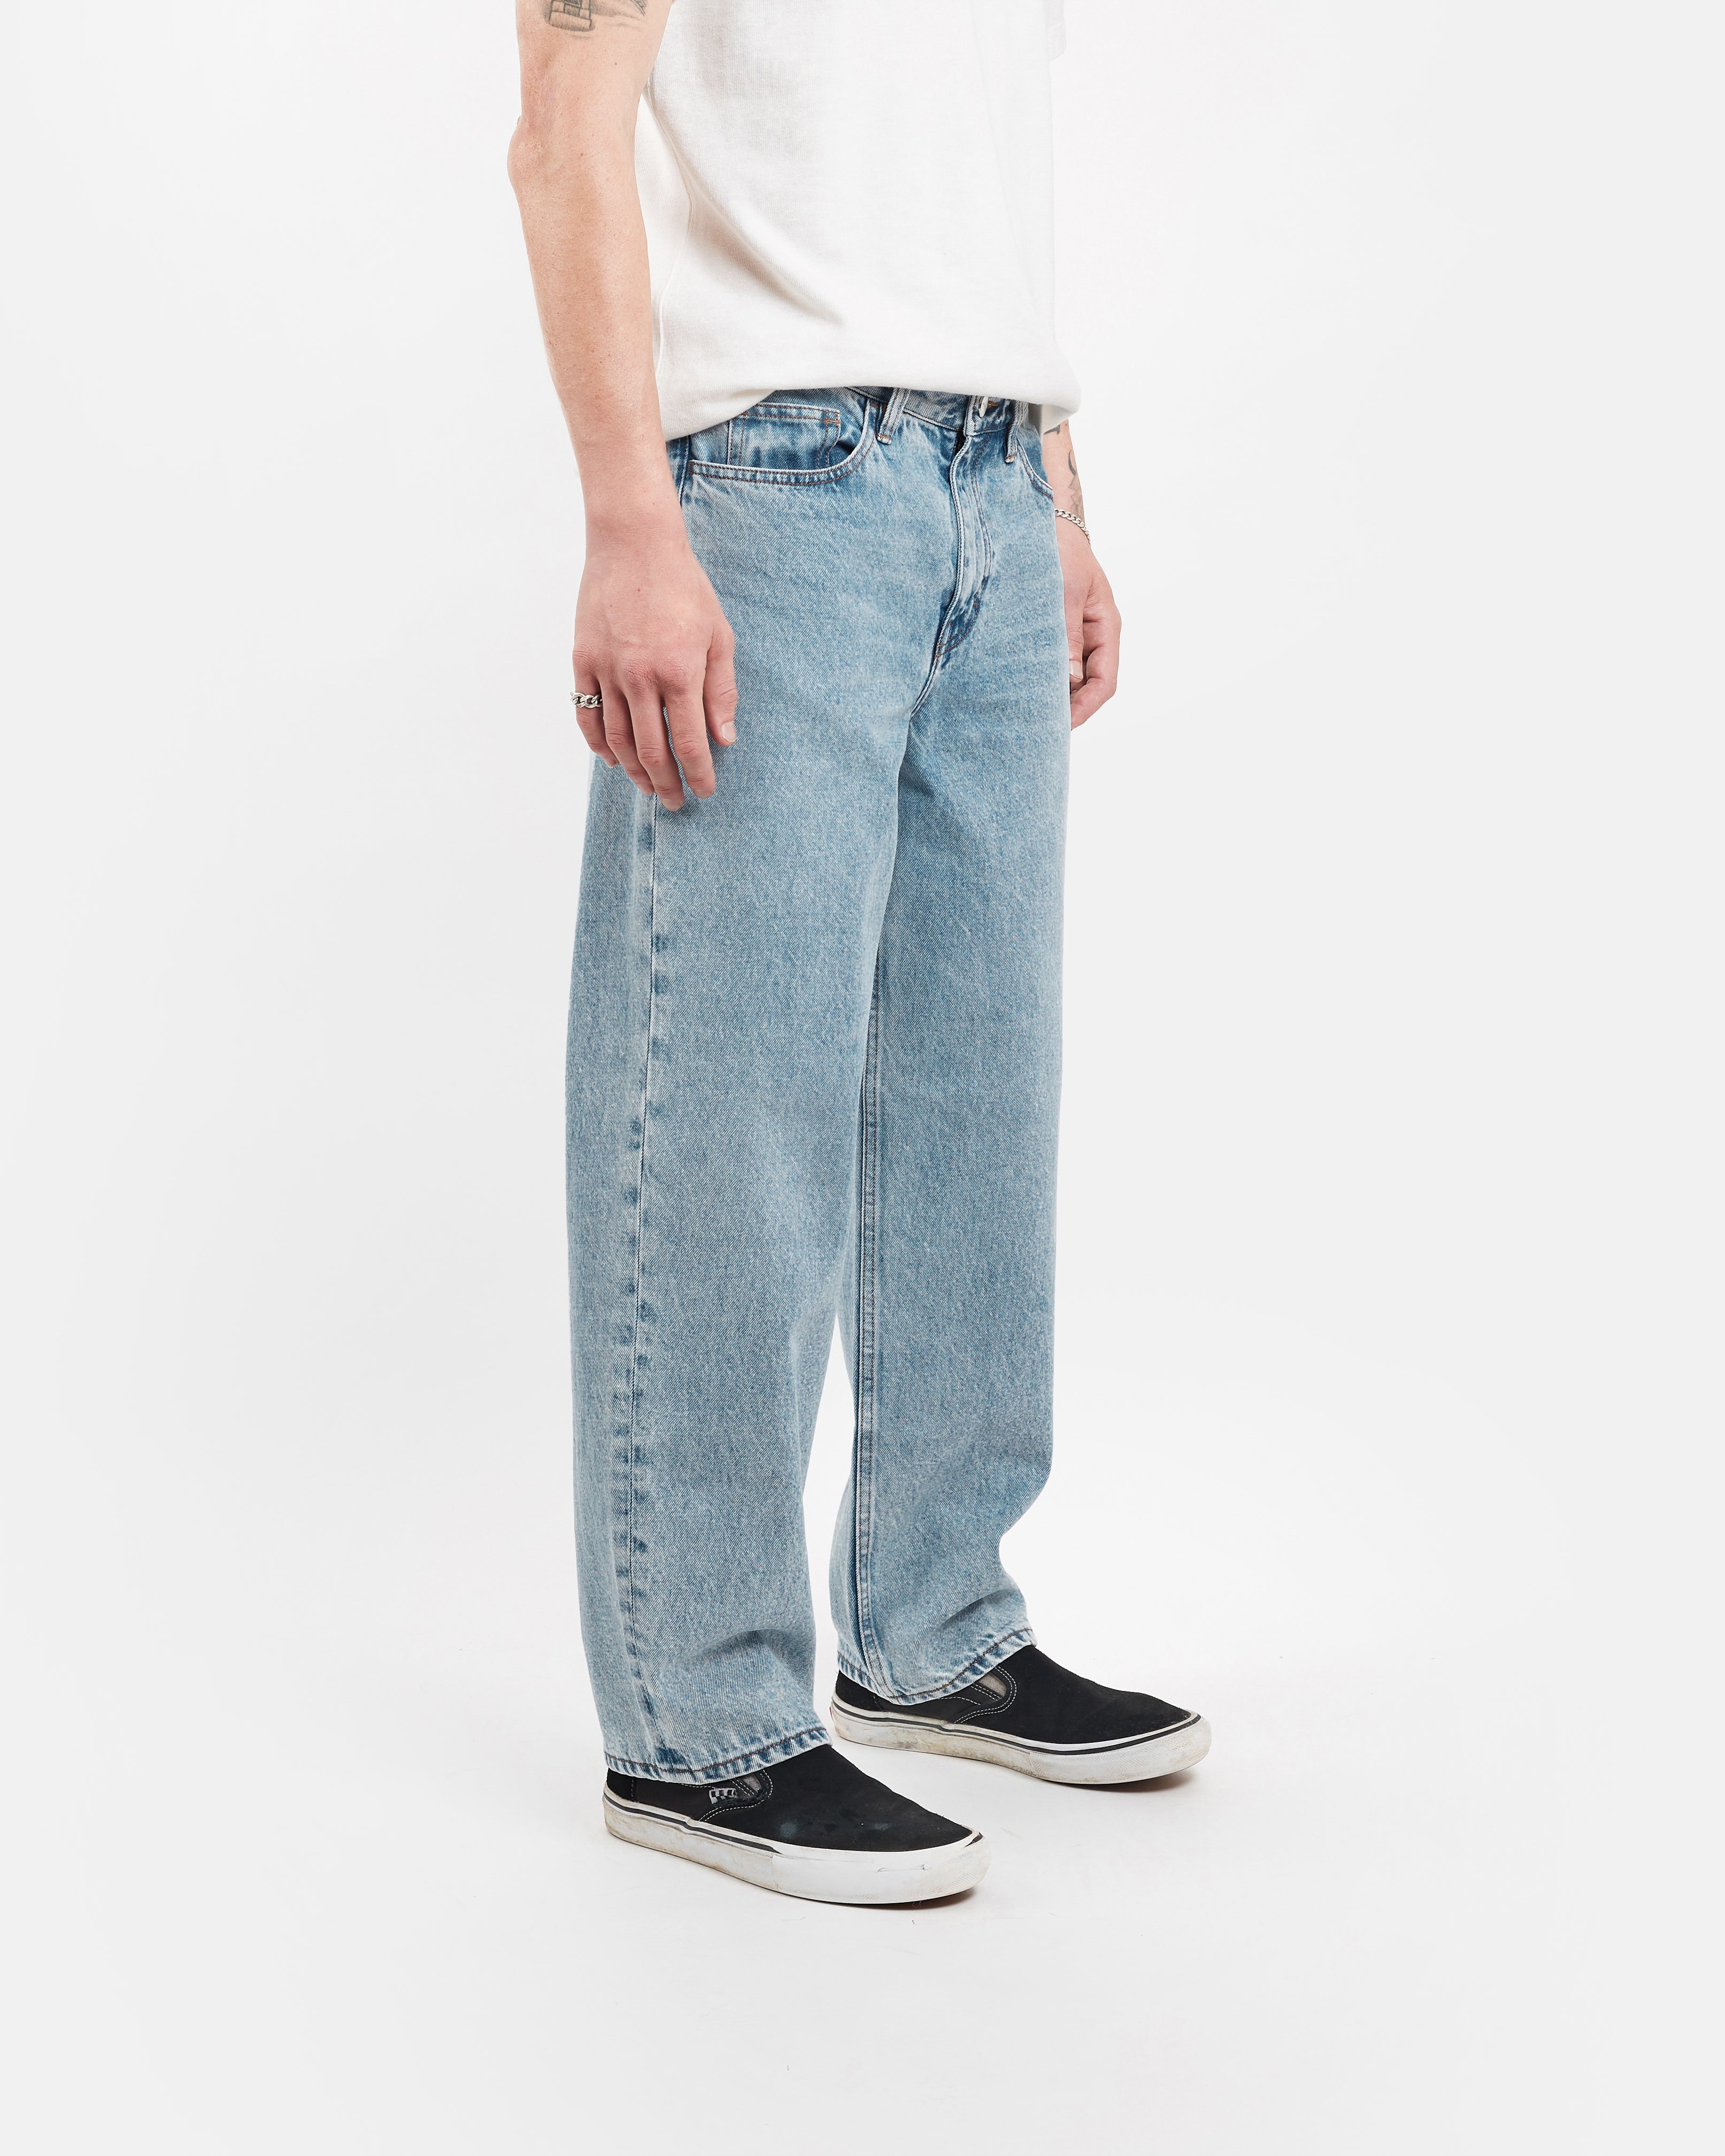 baggy fit jeans in organic mid vintage - unspun made to order denim jeans